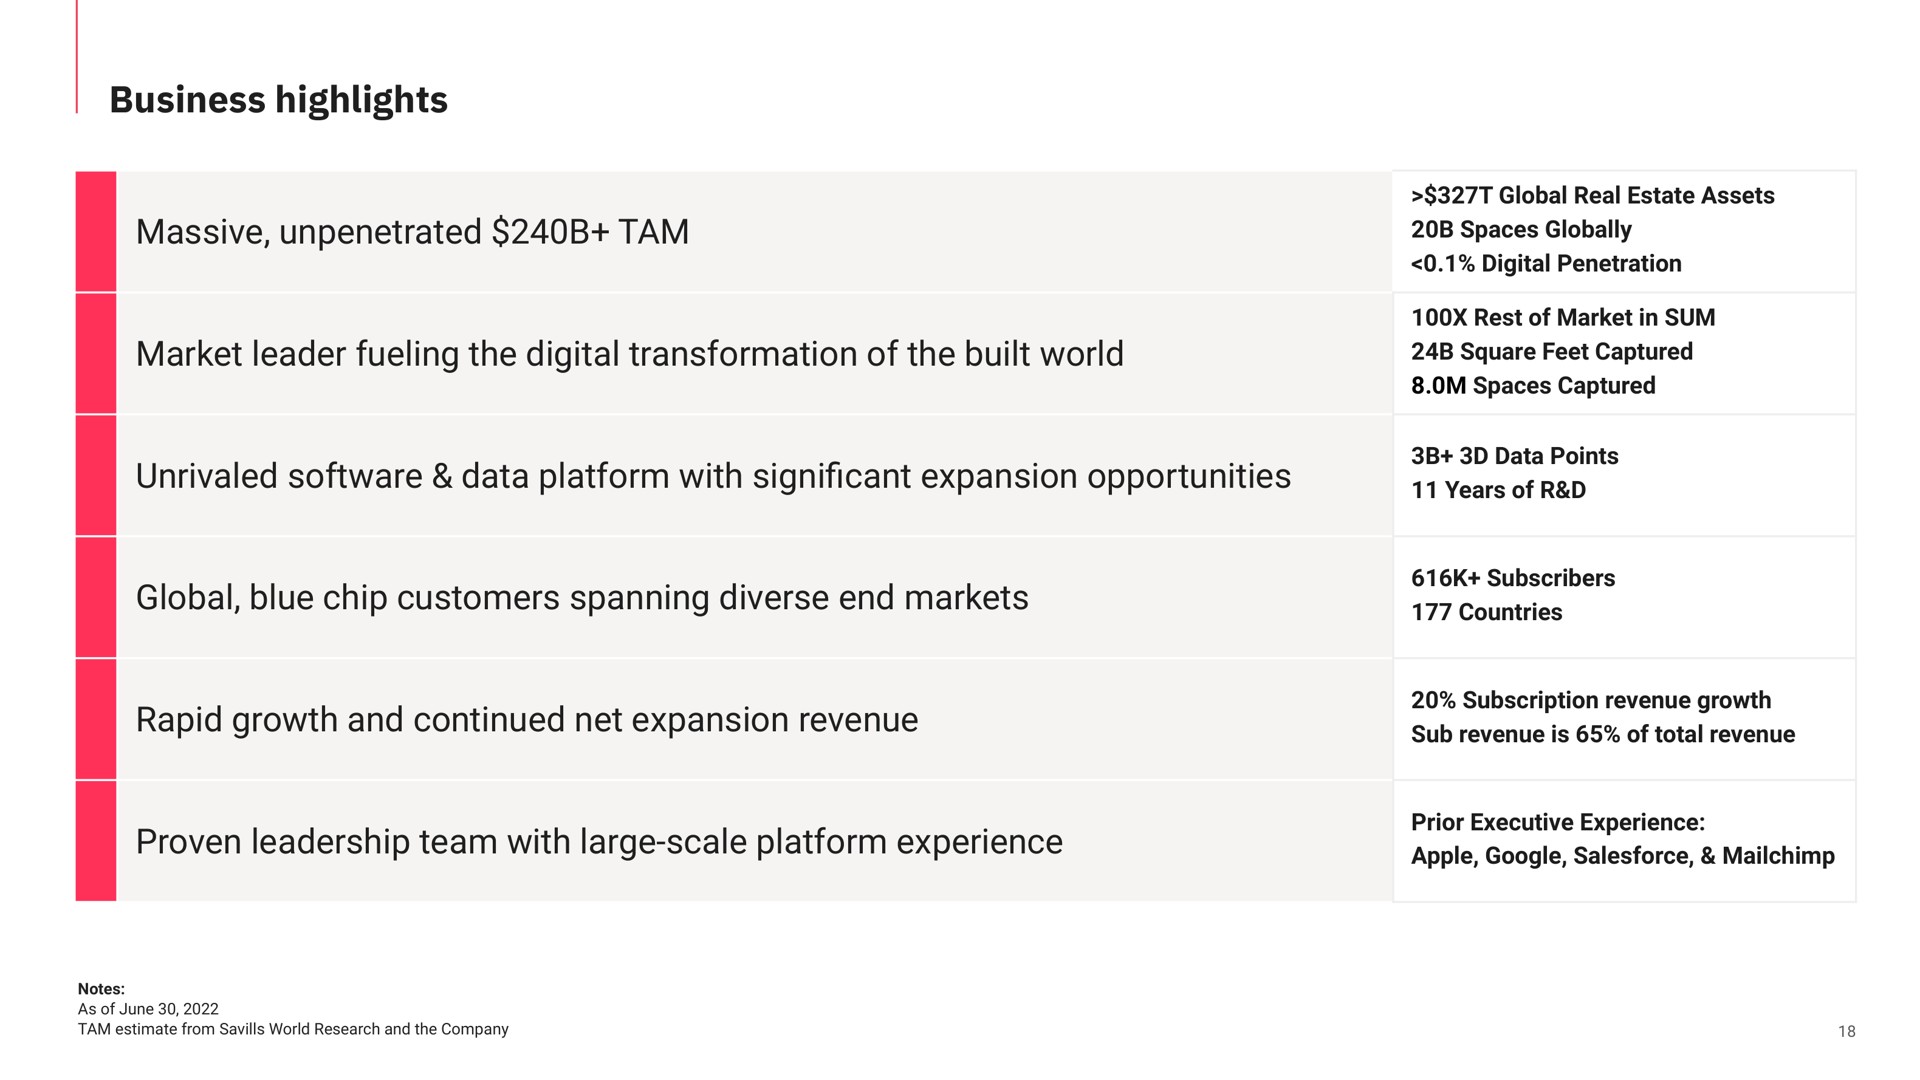 business highlights massive unpenetrated tam market leader fueling the digital transformation of the built world unrivaled data platform with cant expansion opportunities global blue chip customers spanning diverse end markets rapid growth and continued net expansion revenue proven leadership team with large scale platform experience significant | Matterport